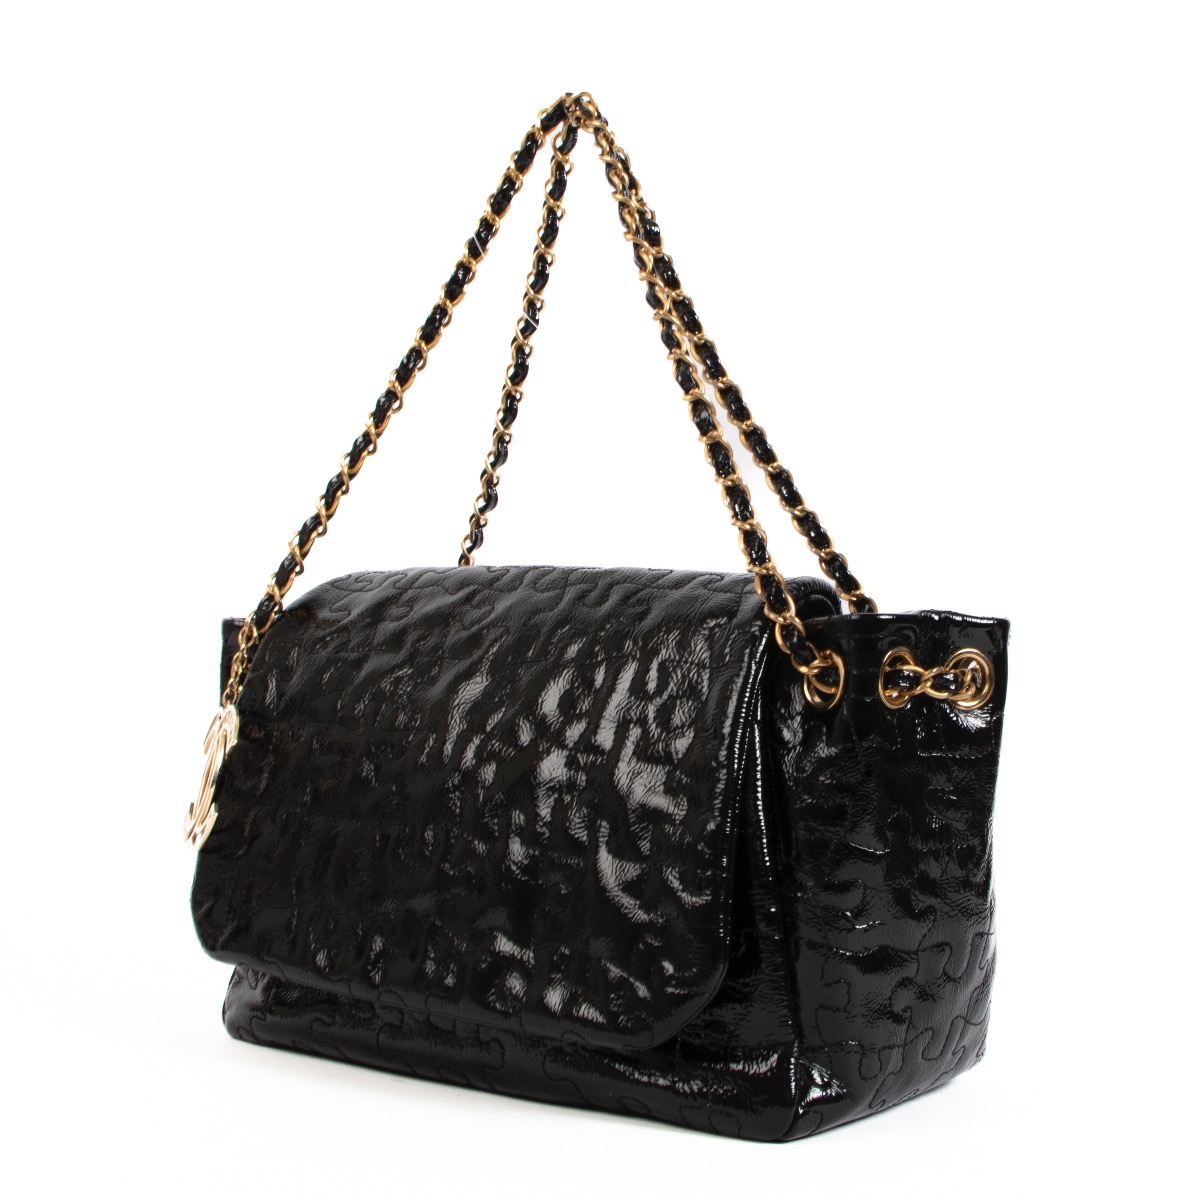 CHANEL, Bags, Chanel Puzzle Black Patent Leather Bag